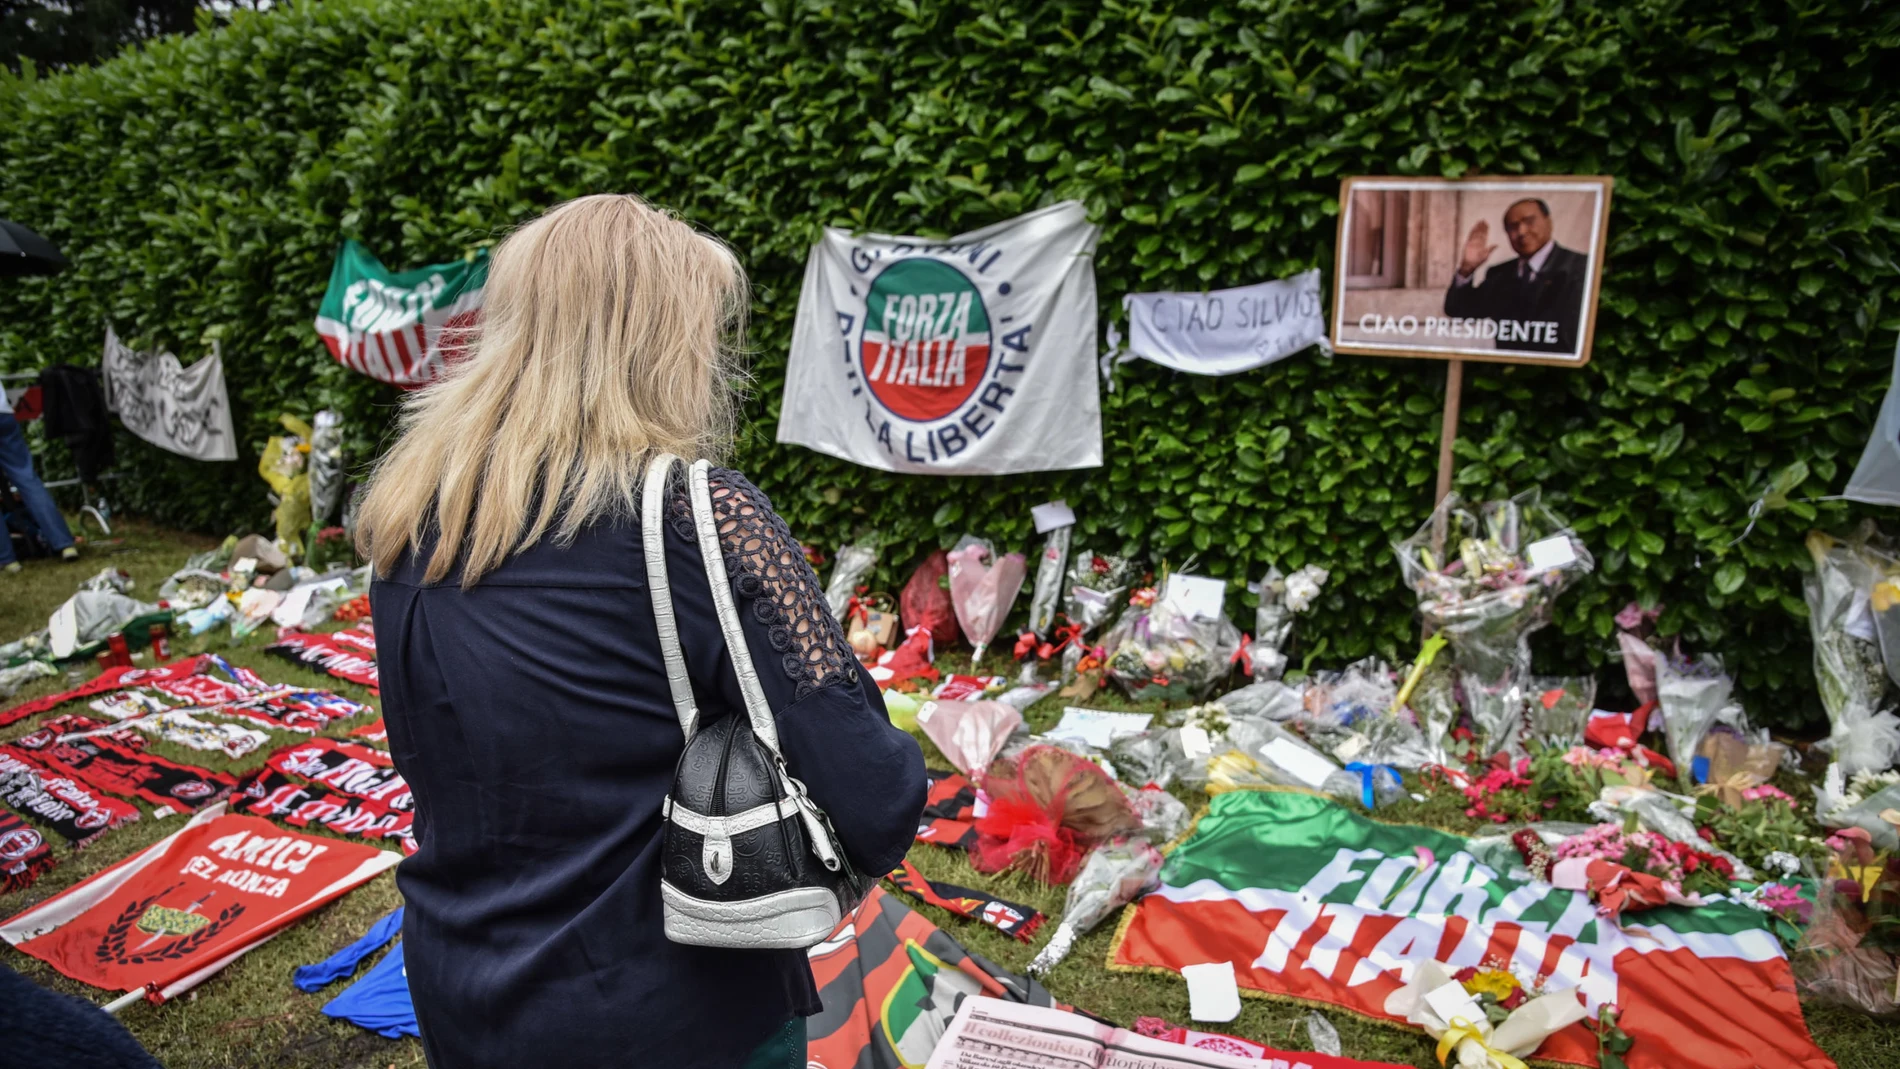 Milan (Italy), 13/06/2023.- A woman looks at flowers, banners and scarves near the entrance to Villa San Martino in Arcore, where the coffin of Silvio Berlusconi was brought a day earlier, near Milan, northern Italy, 13 June 2023. Silvio Berlusconi died at the age of 86 on 12 June 2023 at San Raffaele hospital in Milan, where he was hospitalized again since last 09 June. The Italian media tycoon and Forza Italia (FI) party founder, dubbed as 'Il Cavaliere' (The Knight), served as prime minist...